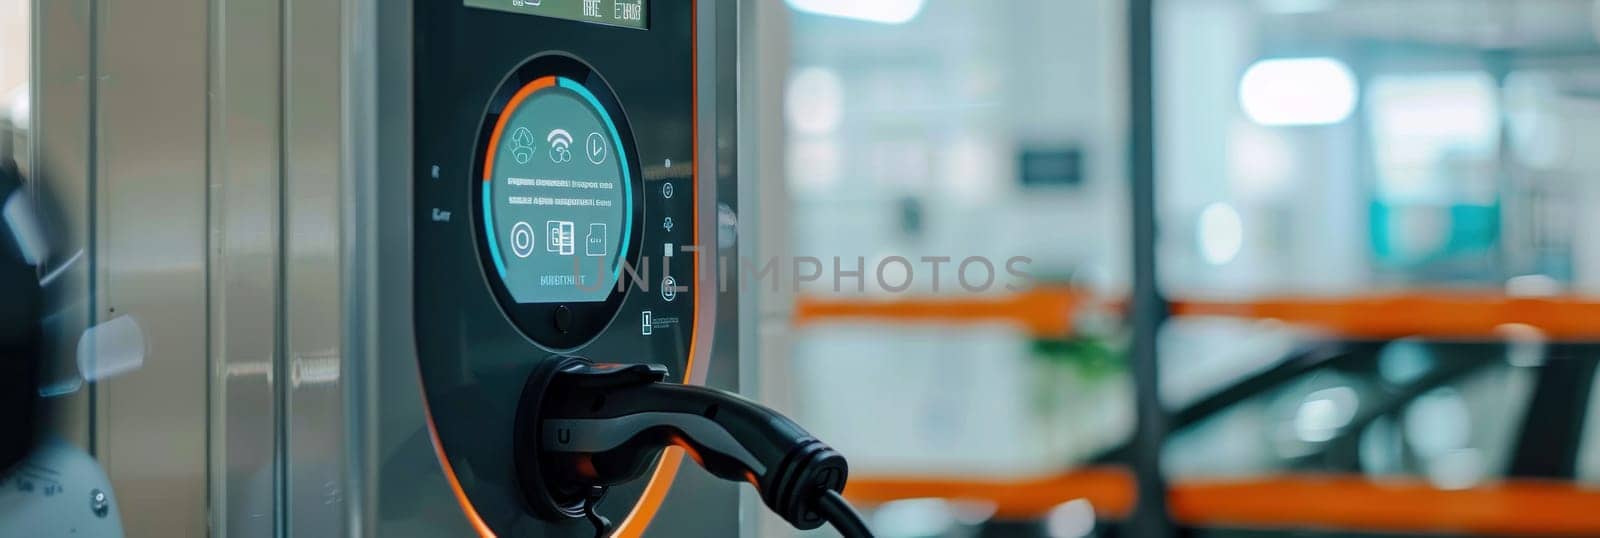 Detailed view of an electric vehicle charging station with a digital display showing environmental impact savings.